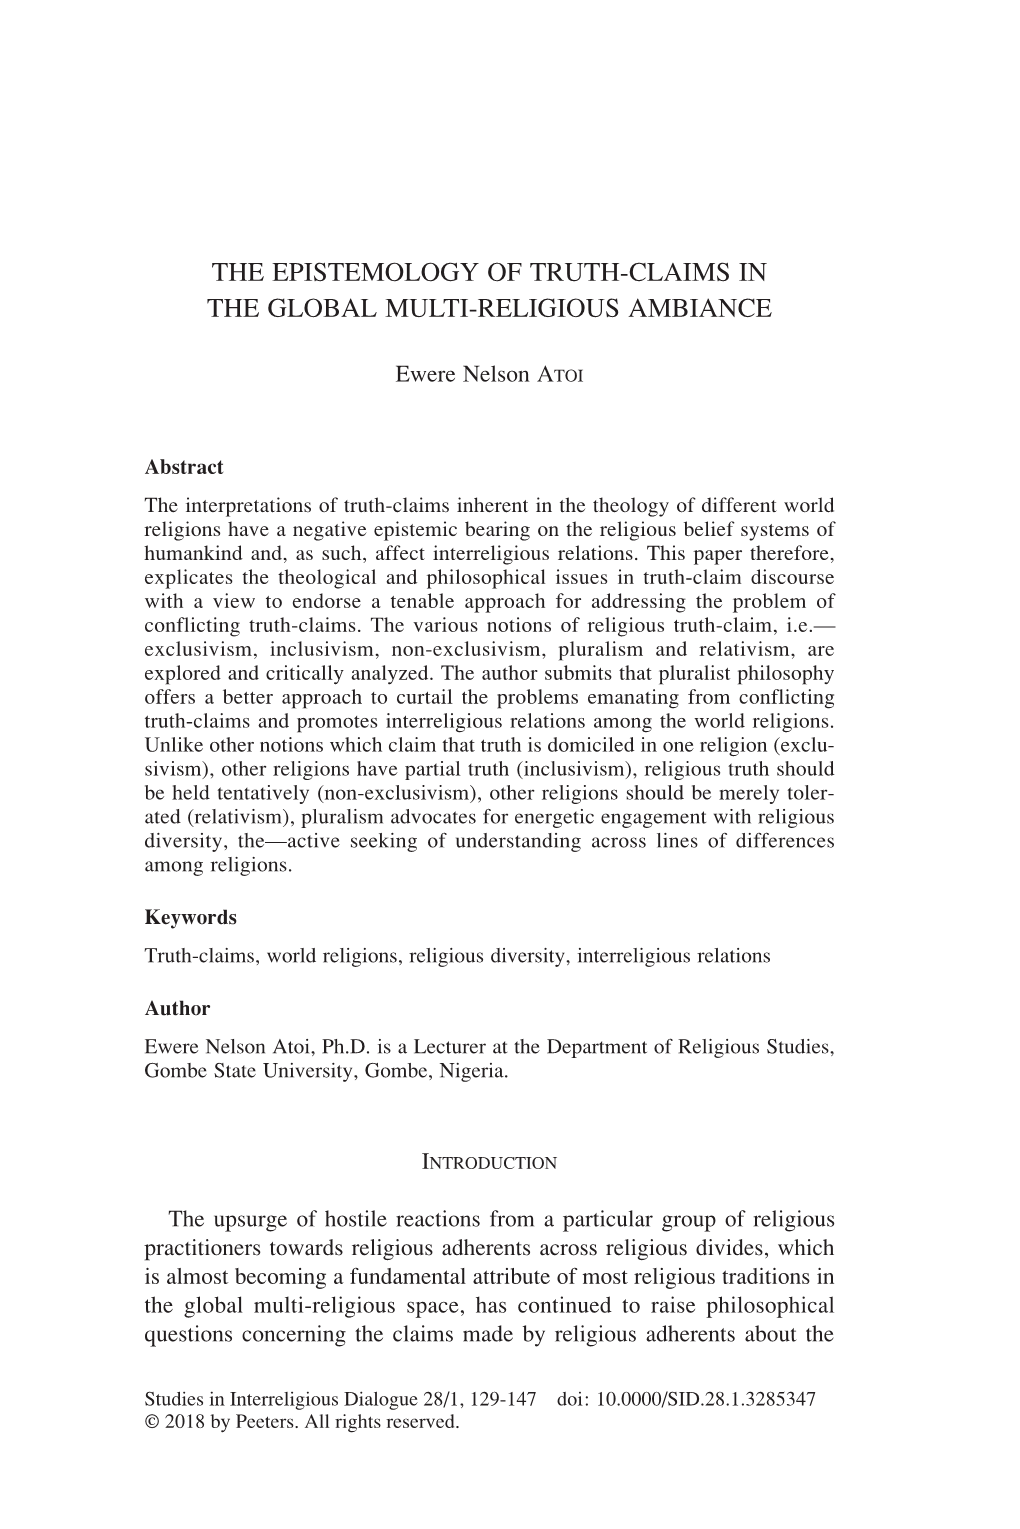 The Epistemology of Truth-Claims in the Global Multi-Religious Ambiance